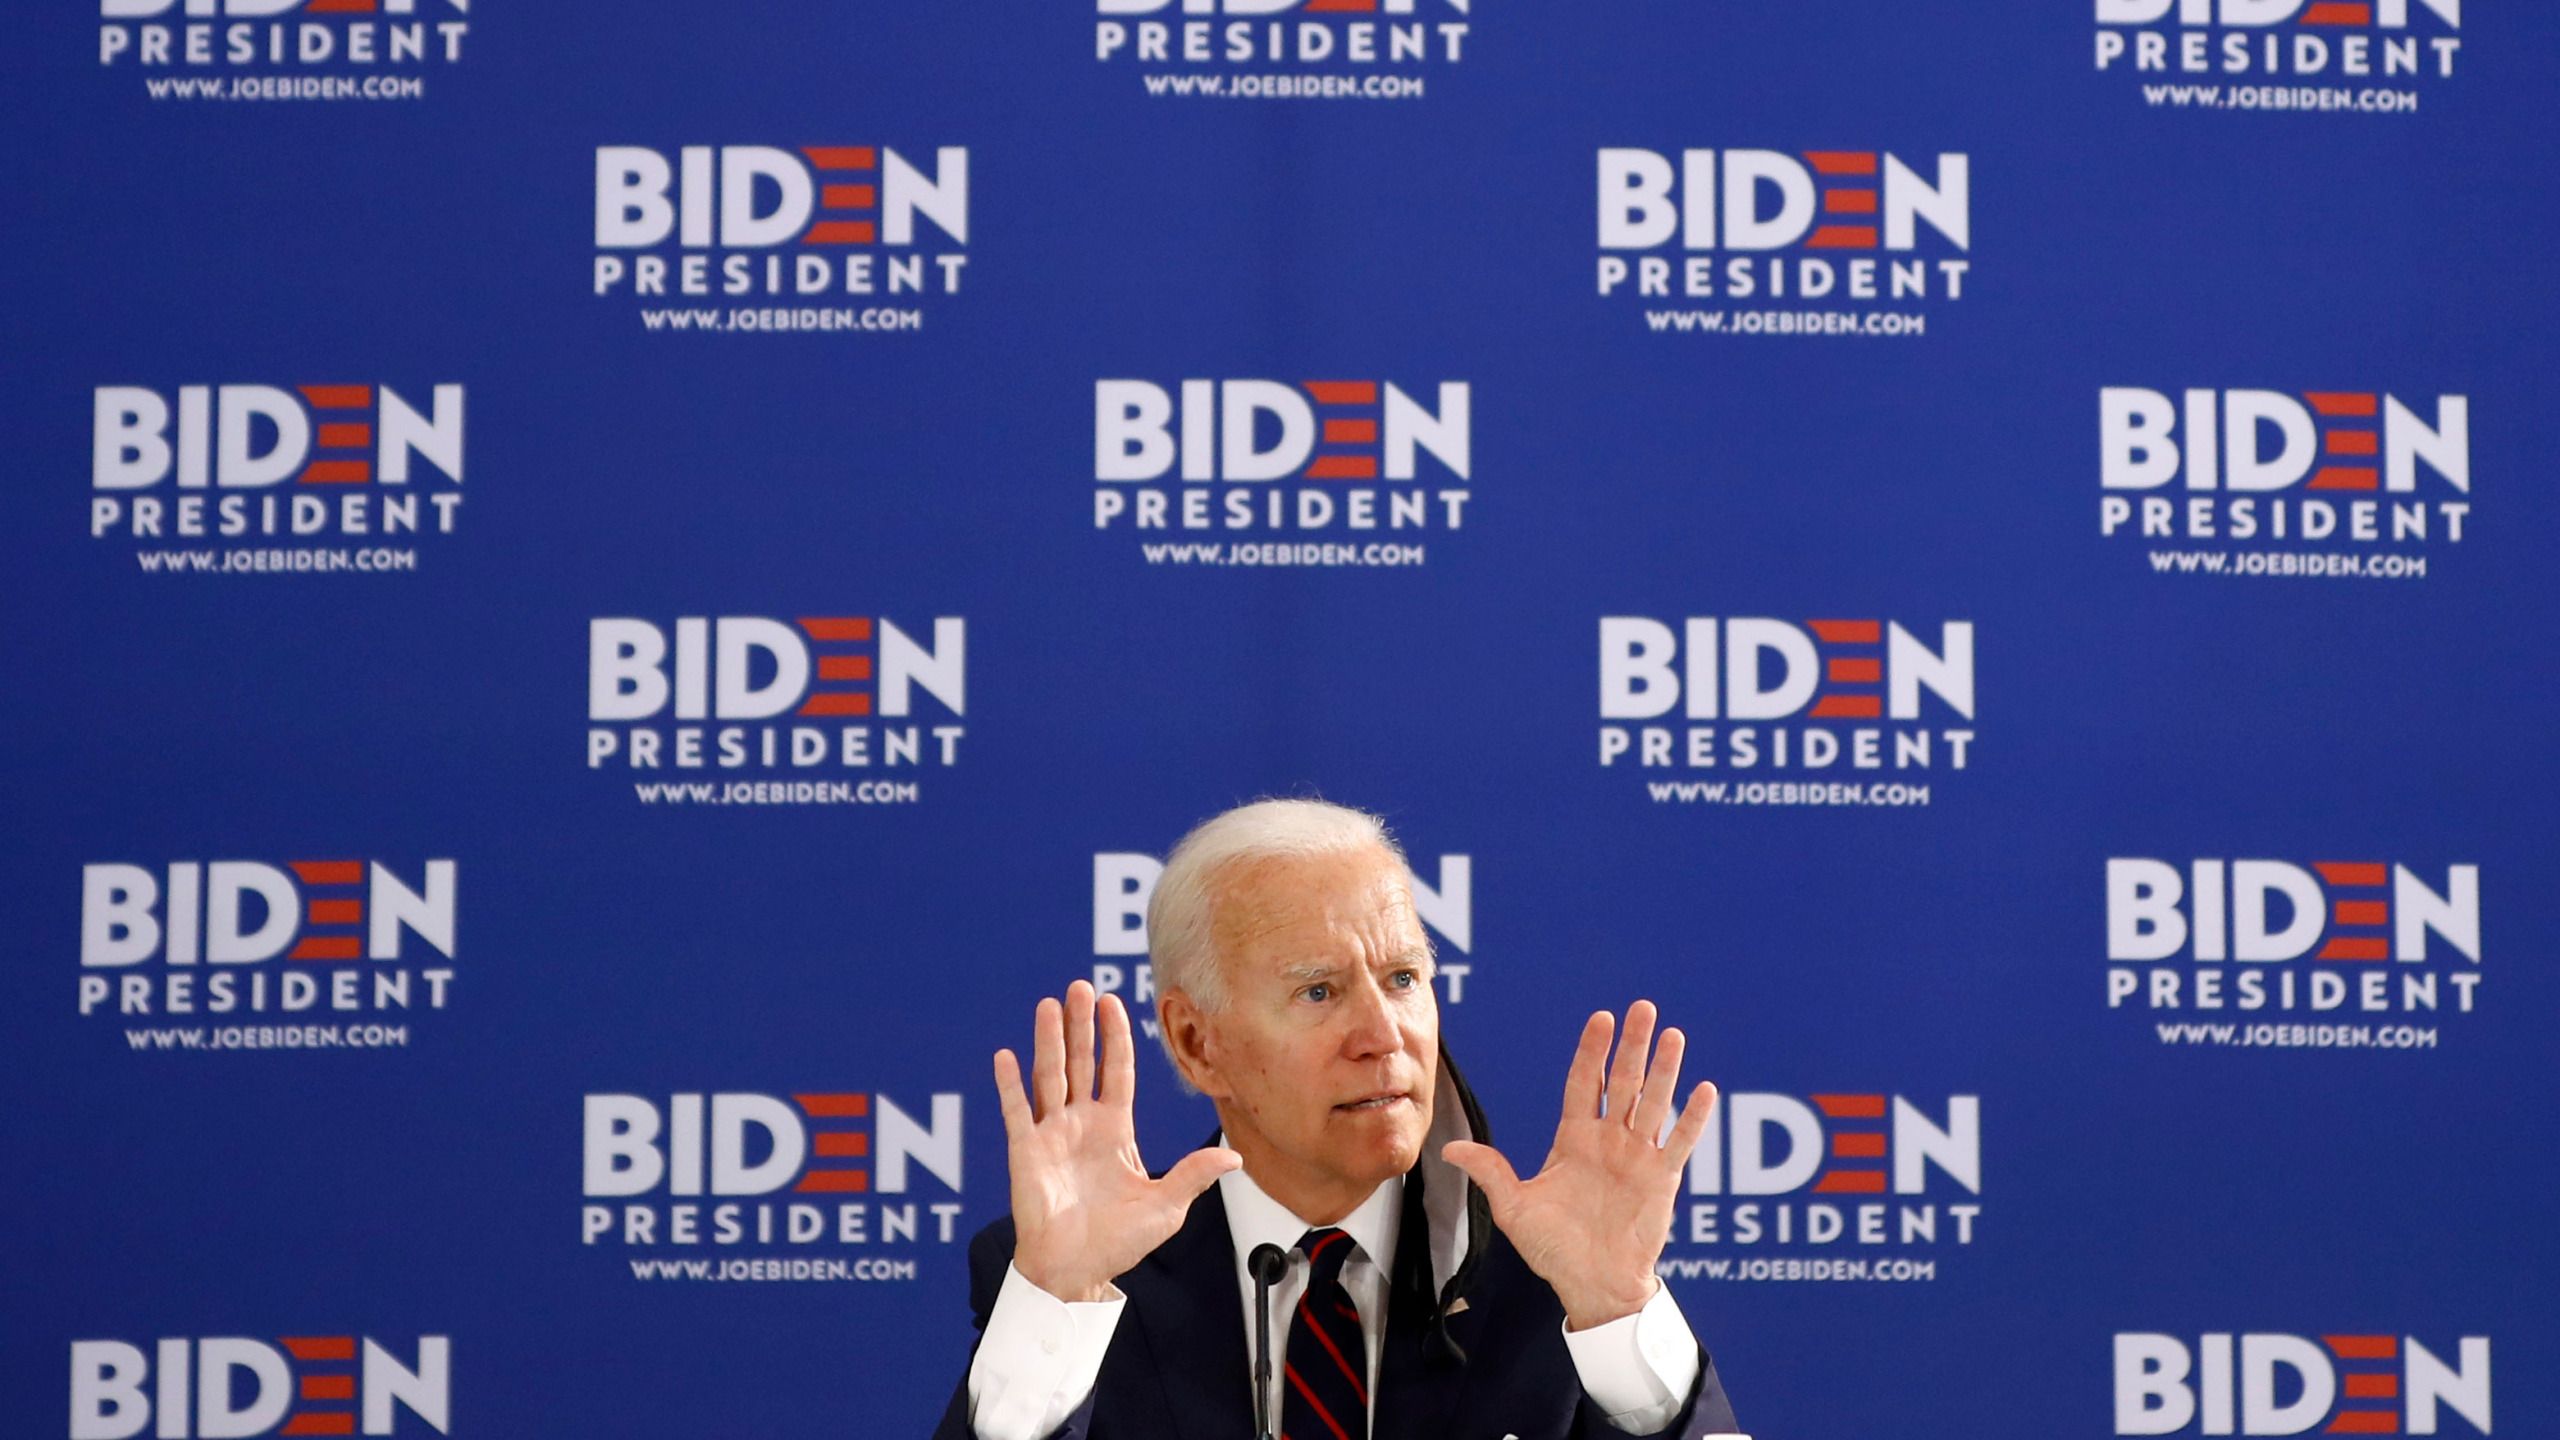 Liberal groups warn Biden could lose over policing policies